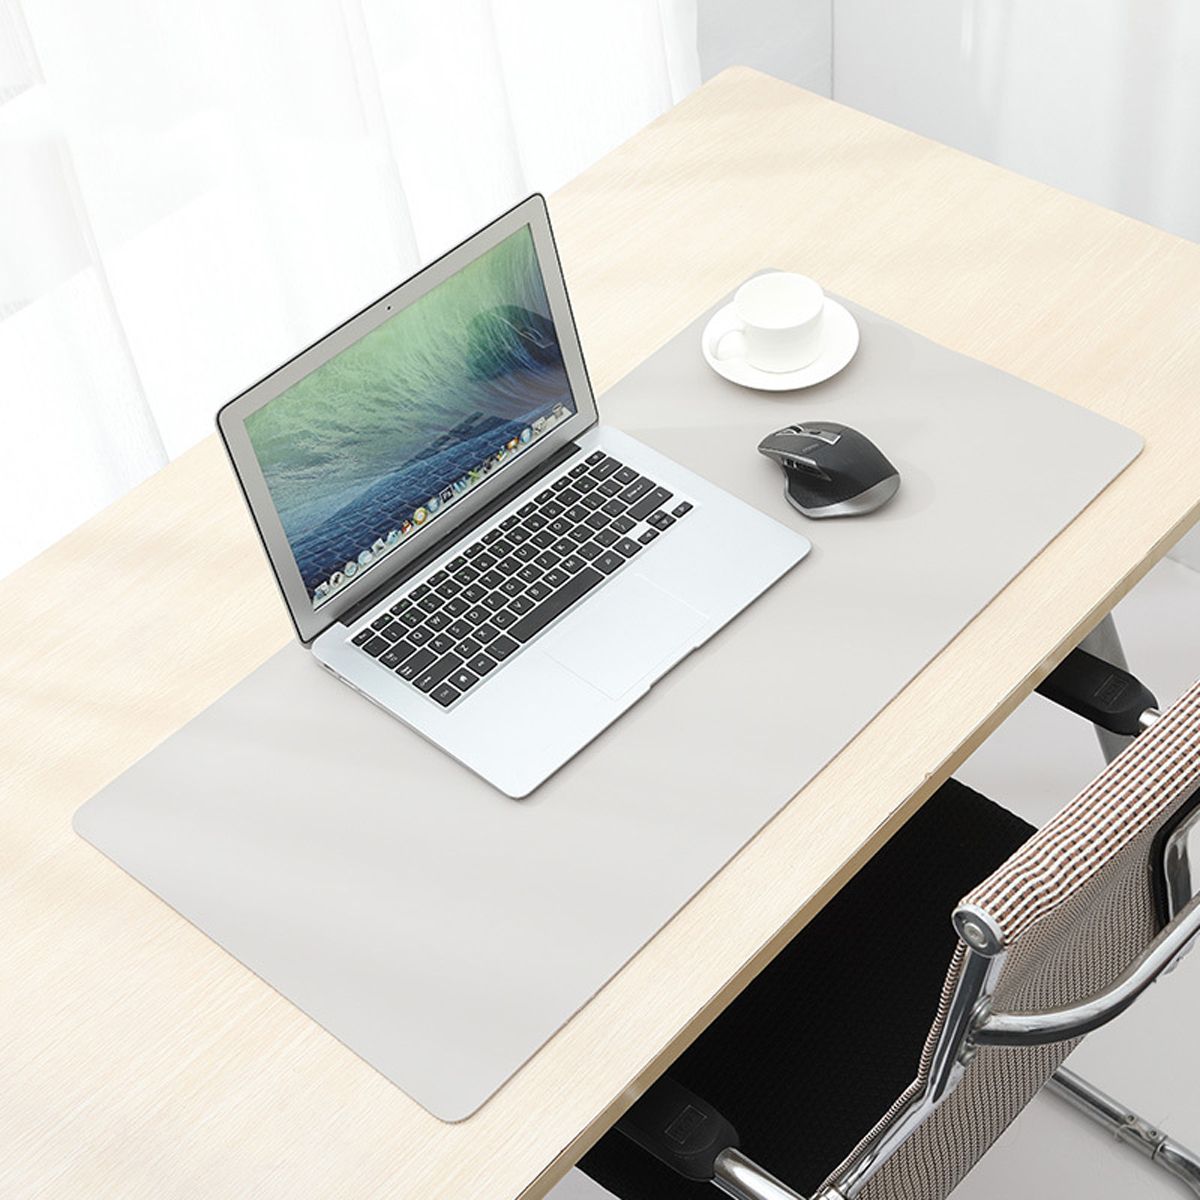 Waterproof-Mouse-Pad-Medium-Office-Gaming-Desk-Mat-PU-Leather-Multifunctional-PVC-Pad-for-Laptop-Mou-1745692